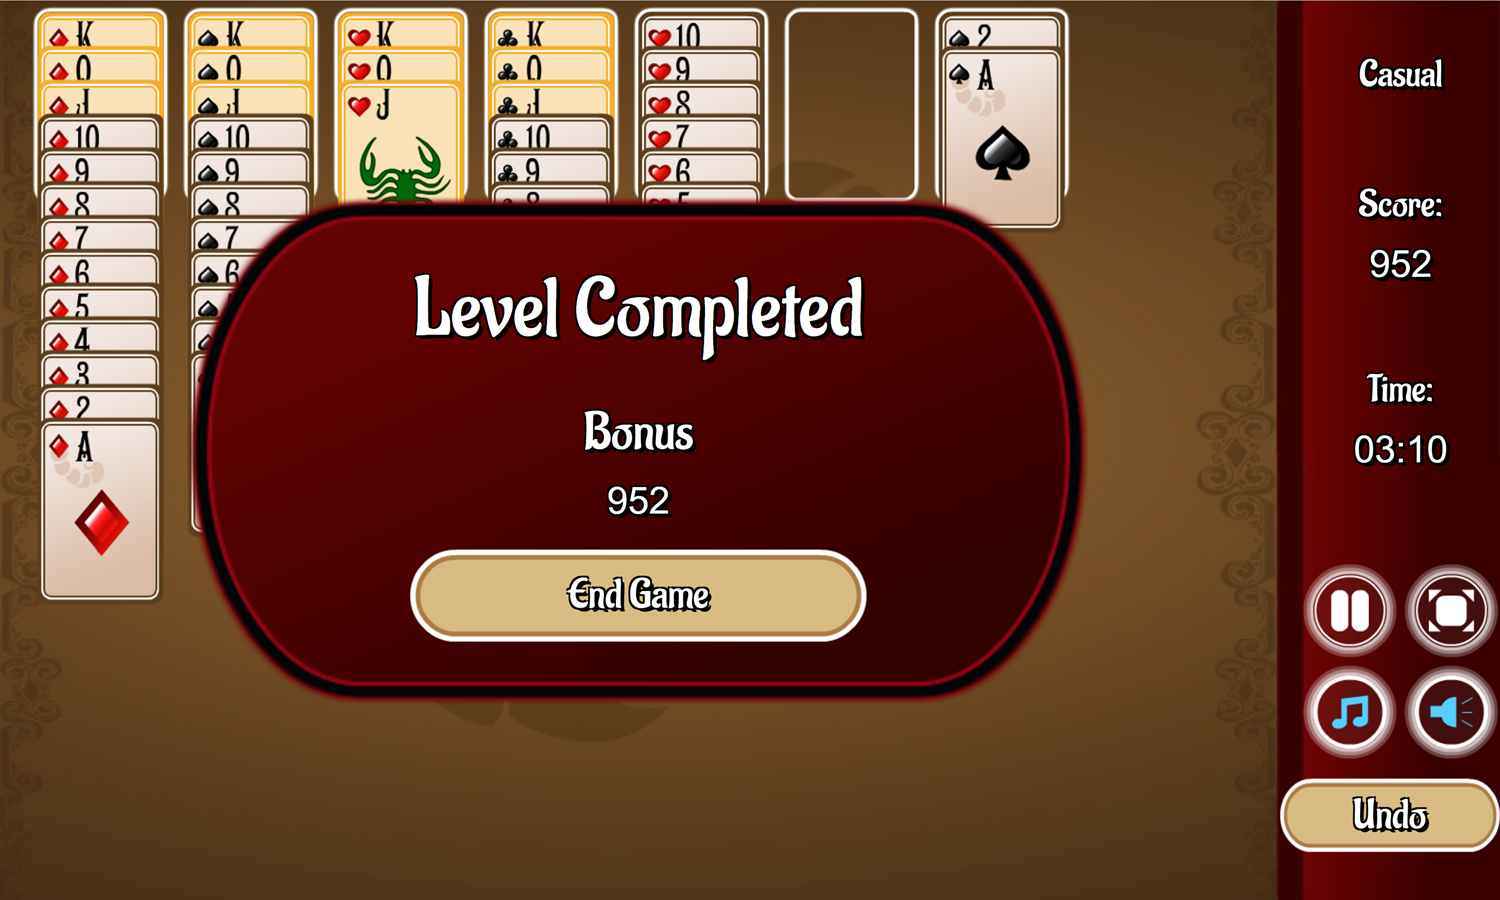 Scorpion Solitaire Game Level Completed Screen Screenshot.